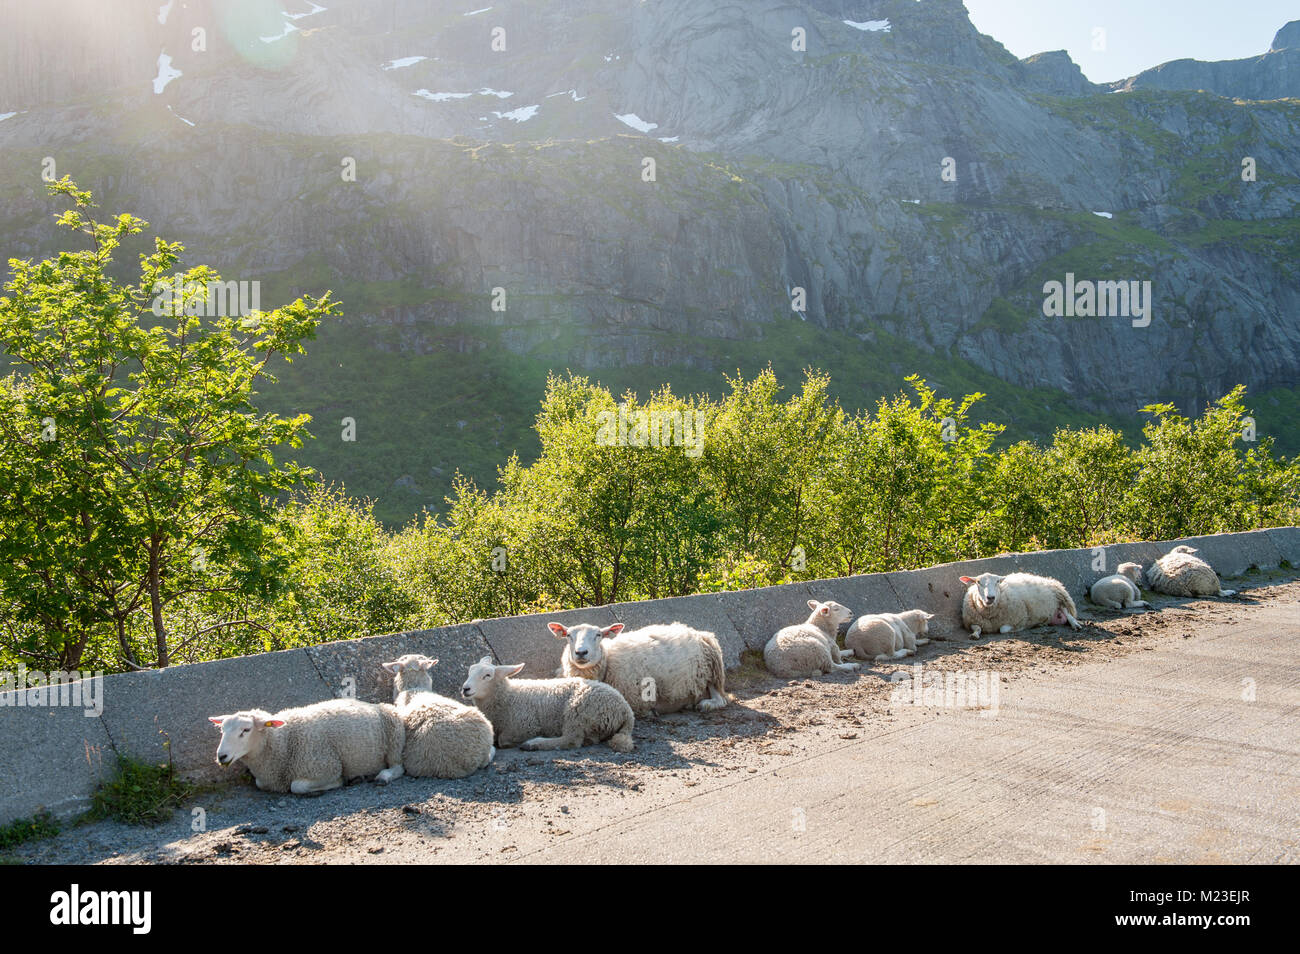 Driving through scenic summer landscape at Lofoten in northern Norway. Sheep on the road. Stock Photo